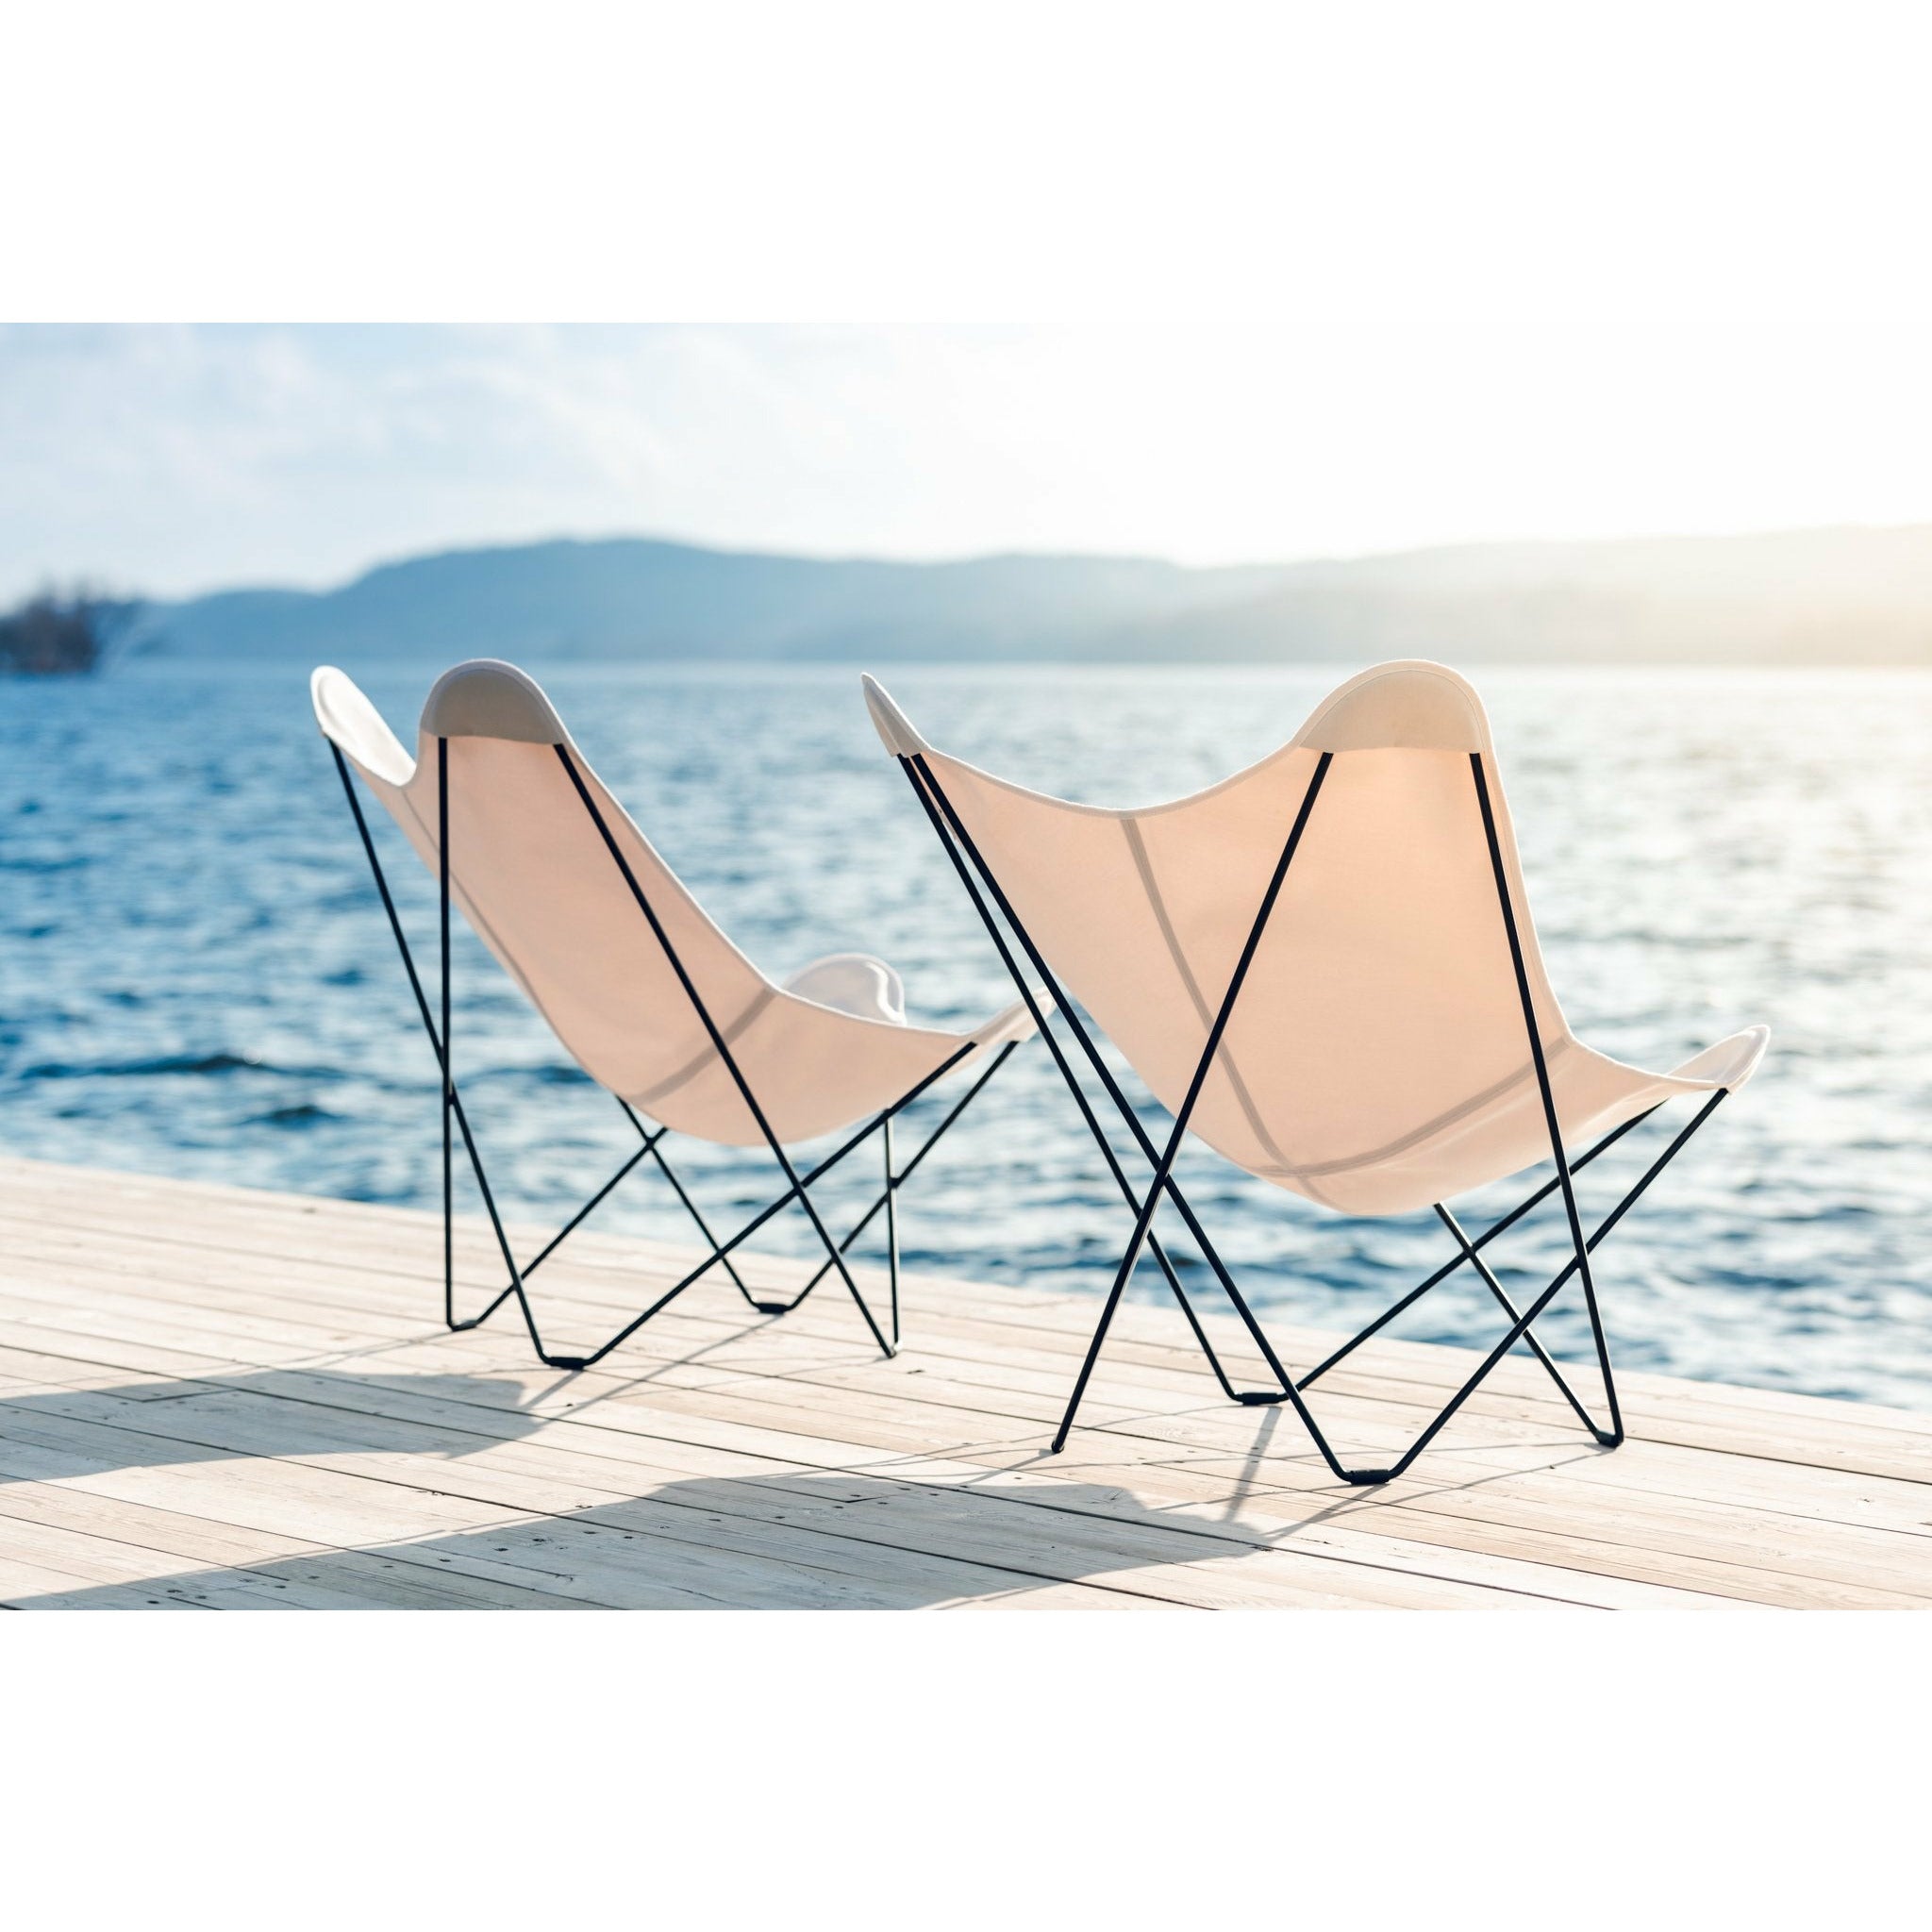 Cuero Sunshine Mariposa Butterfly Chaise, Oyster / Grey Outdoor Cadre